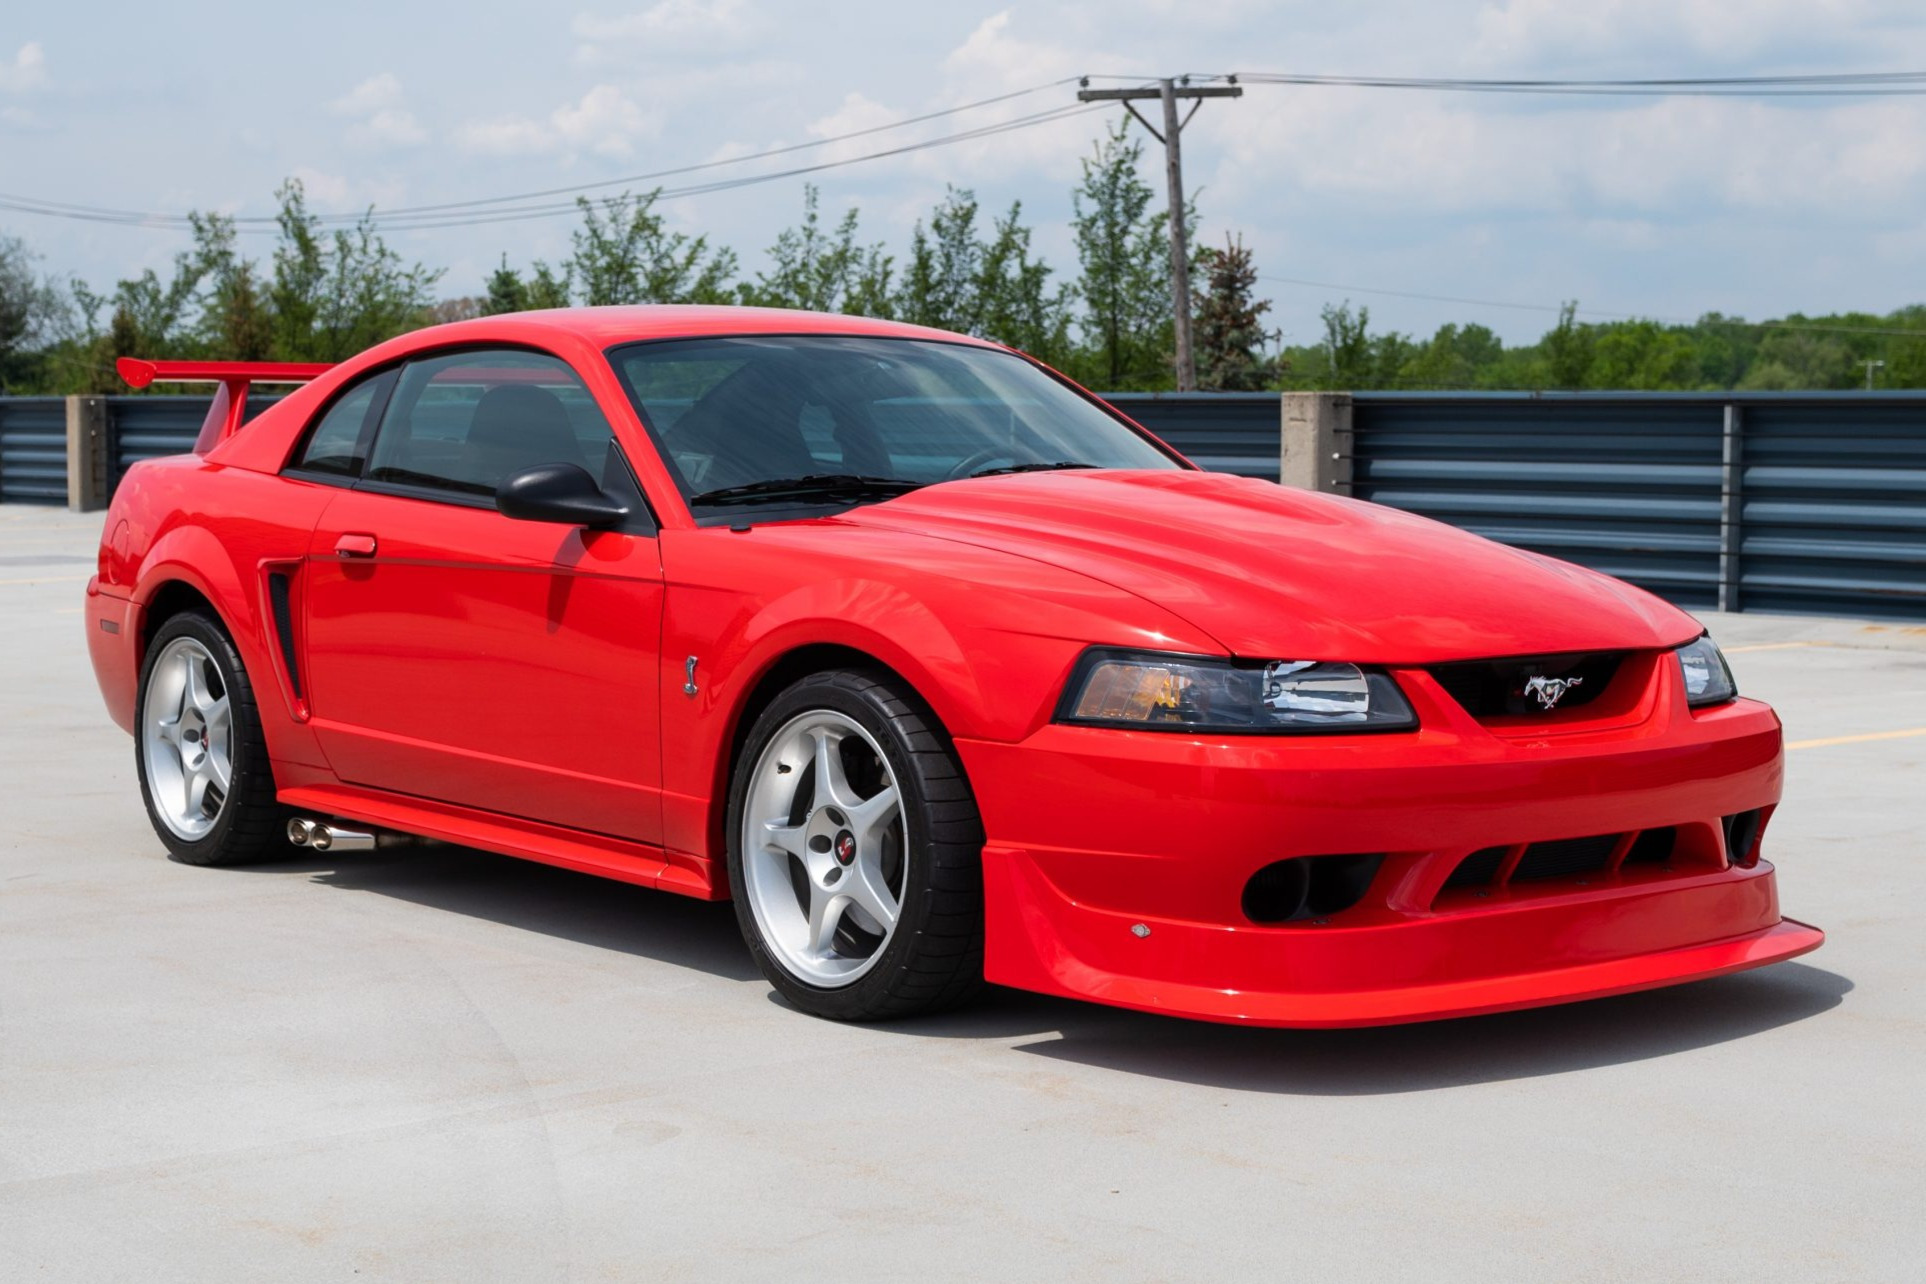 Ford Mustang Svt Cobra R Is A Must Have For Every Collector